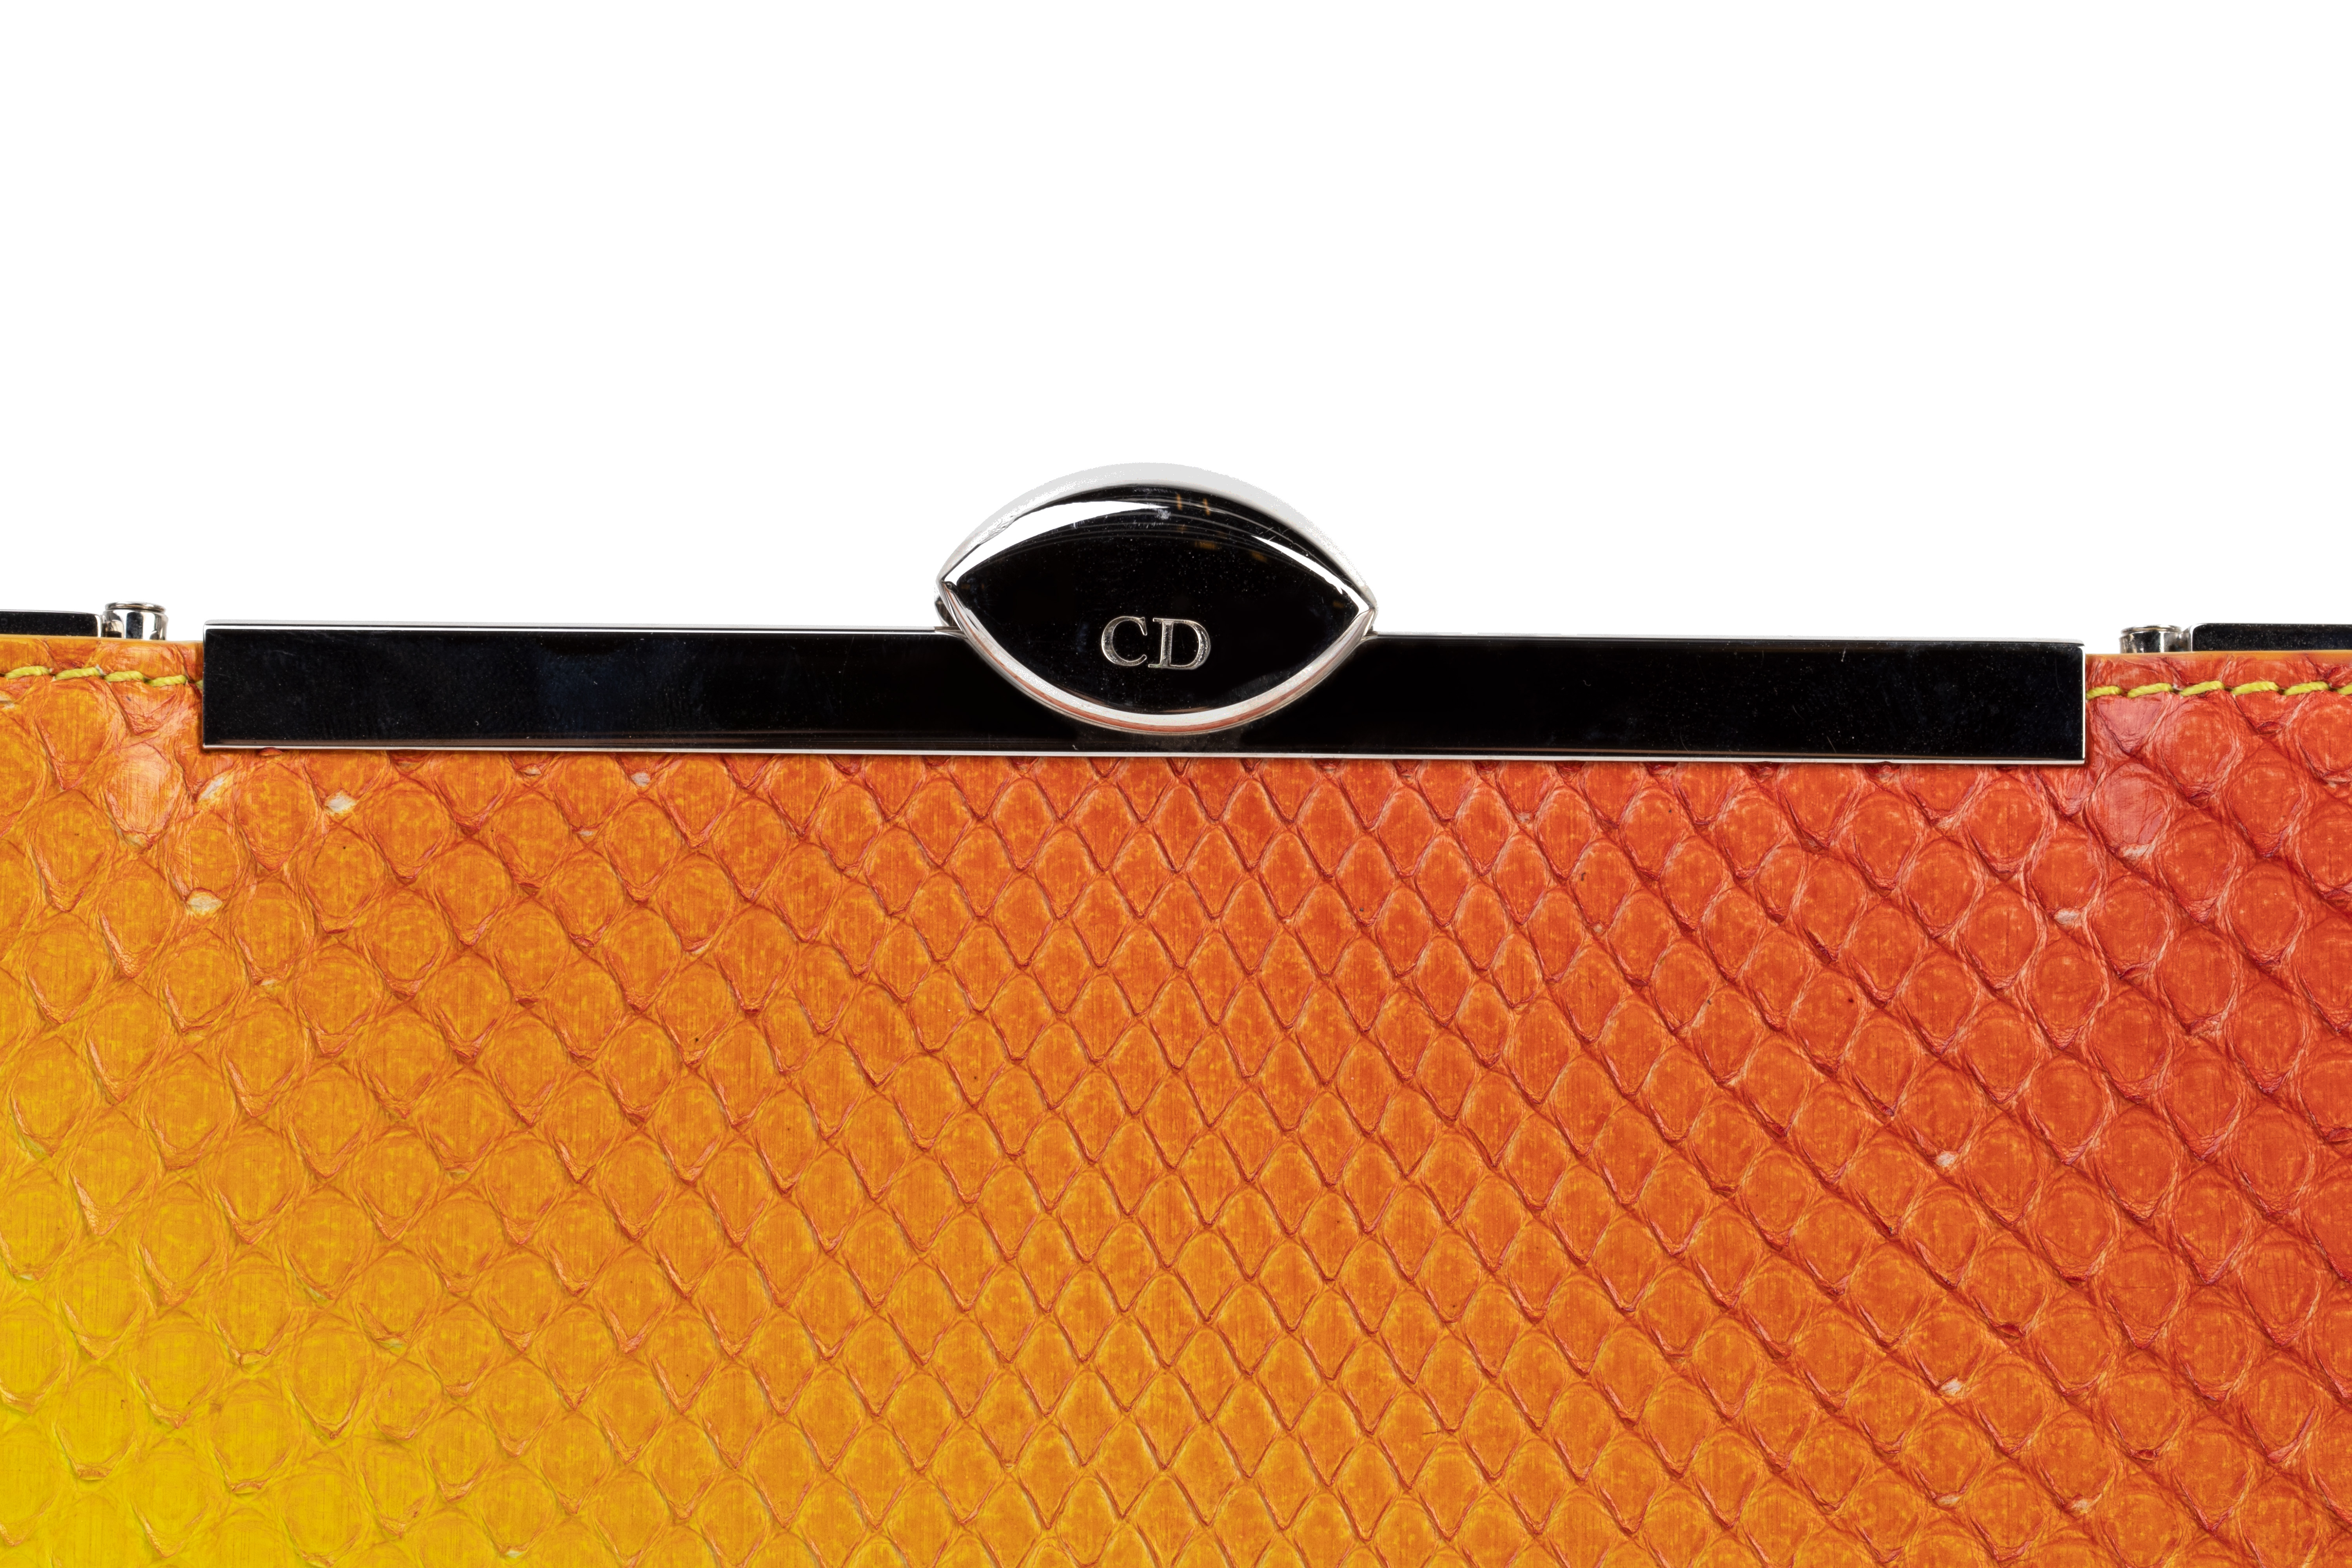 A CHRISTIAN DIOR OMBRE CRUISE CLUTCH - Image 2 of 4